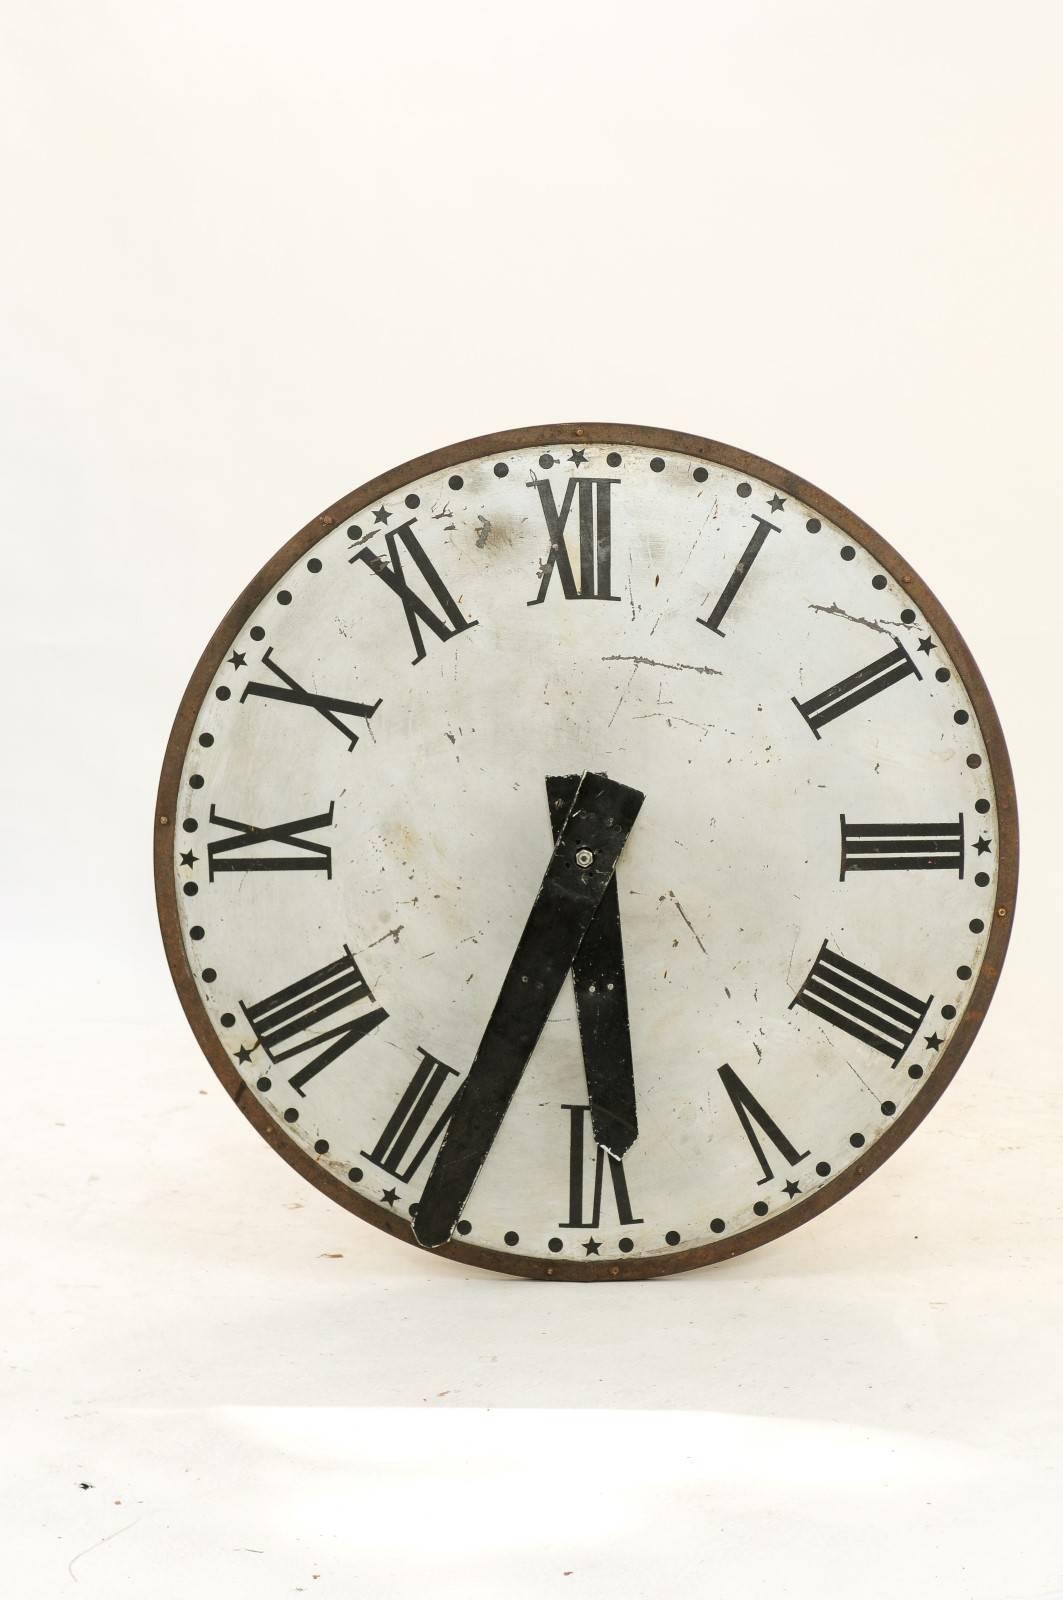 A large French late 19th century clock face with Roman Numerals. This is one of two clocks that came off of a church steeple in the Haute-Loire part of central France. It’s the real thing, and it’s from the 1890s! We found it in Paris, from a vendor